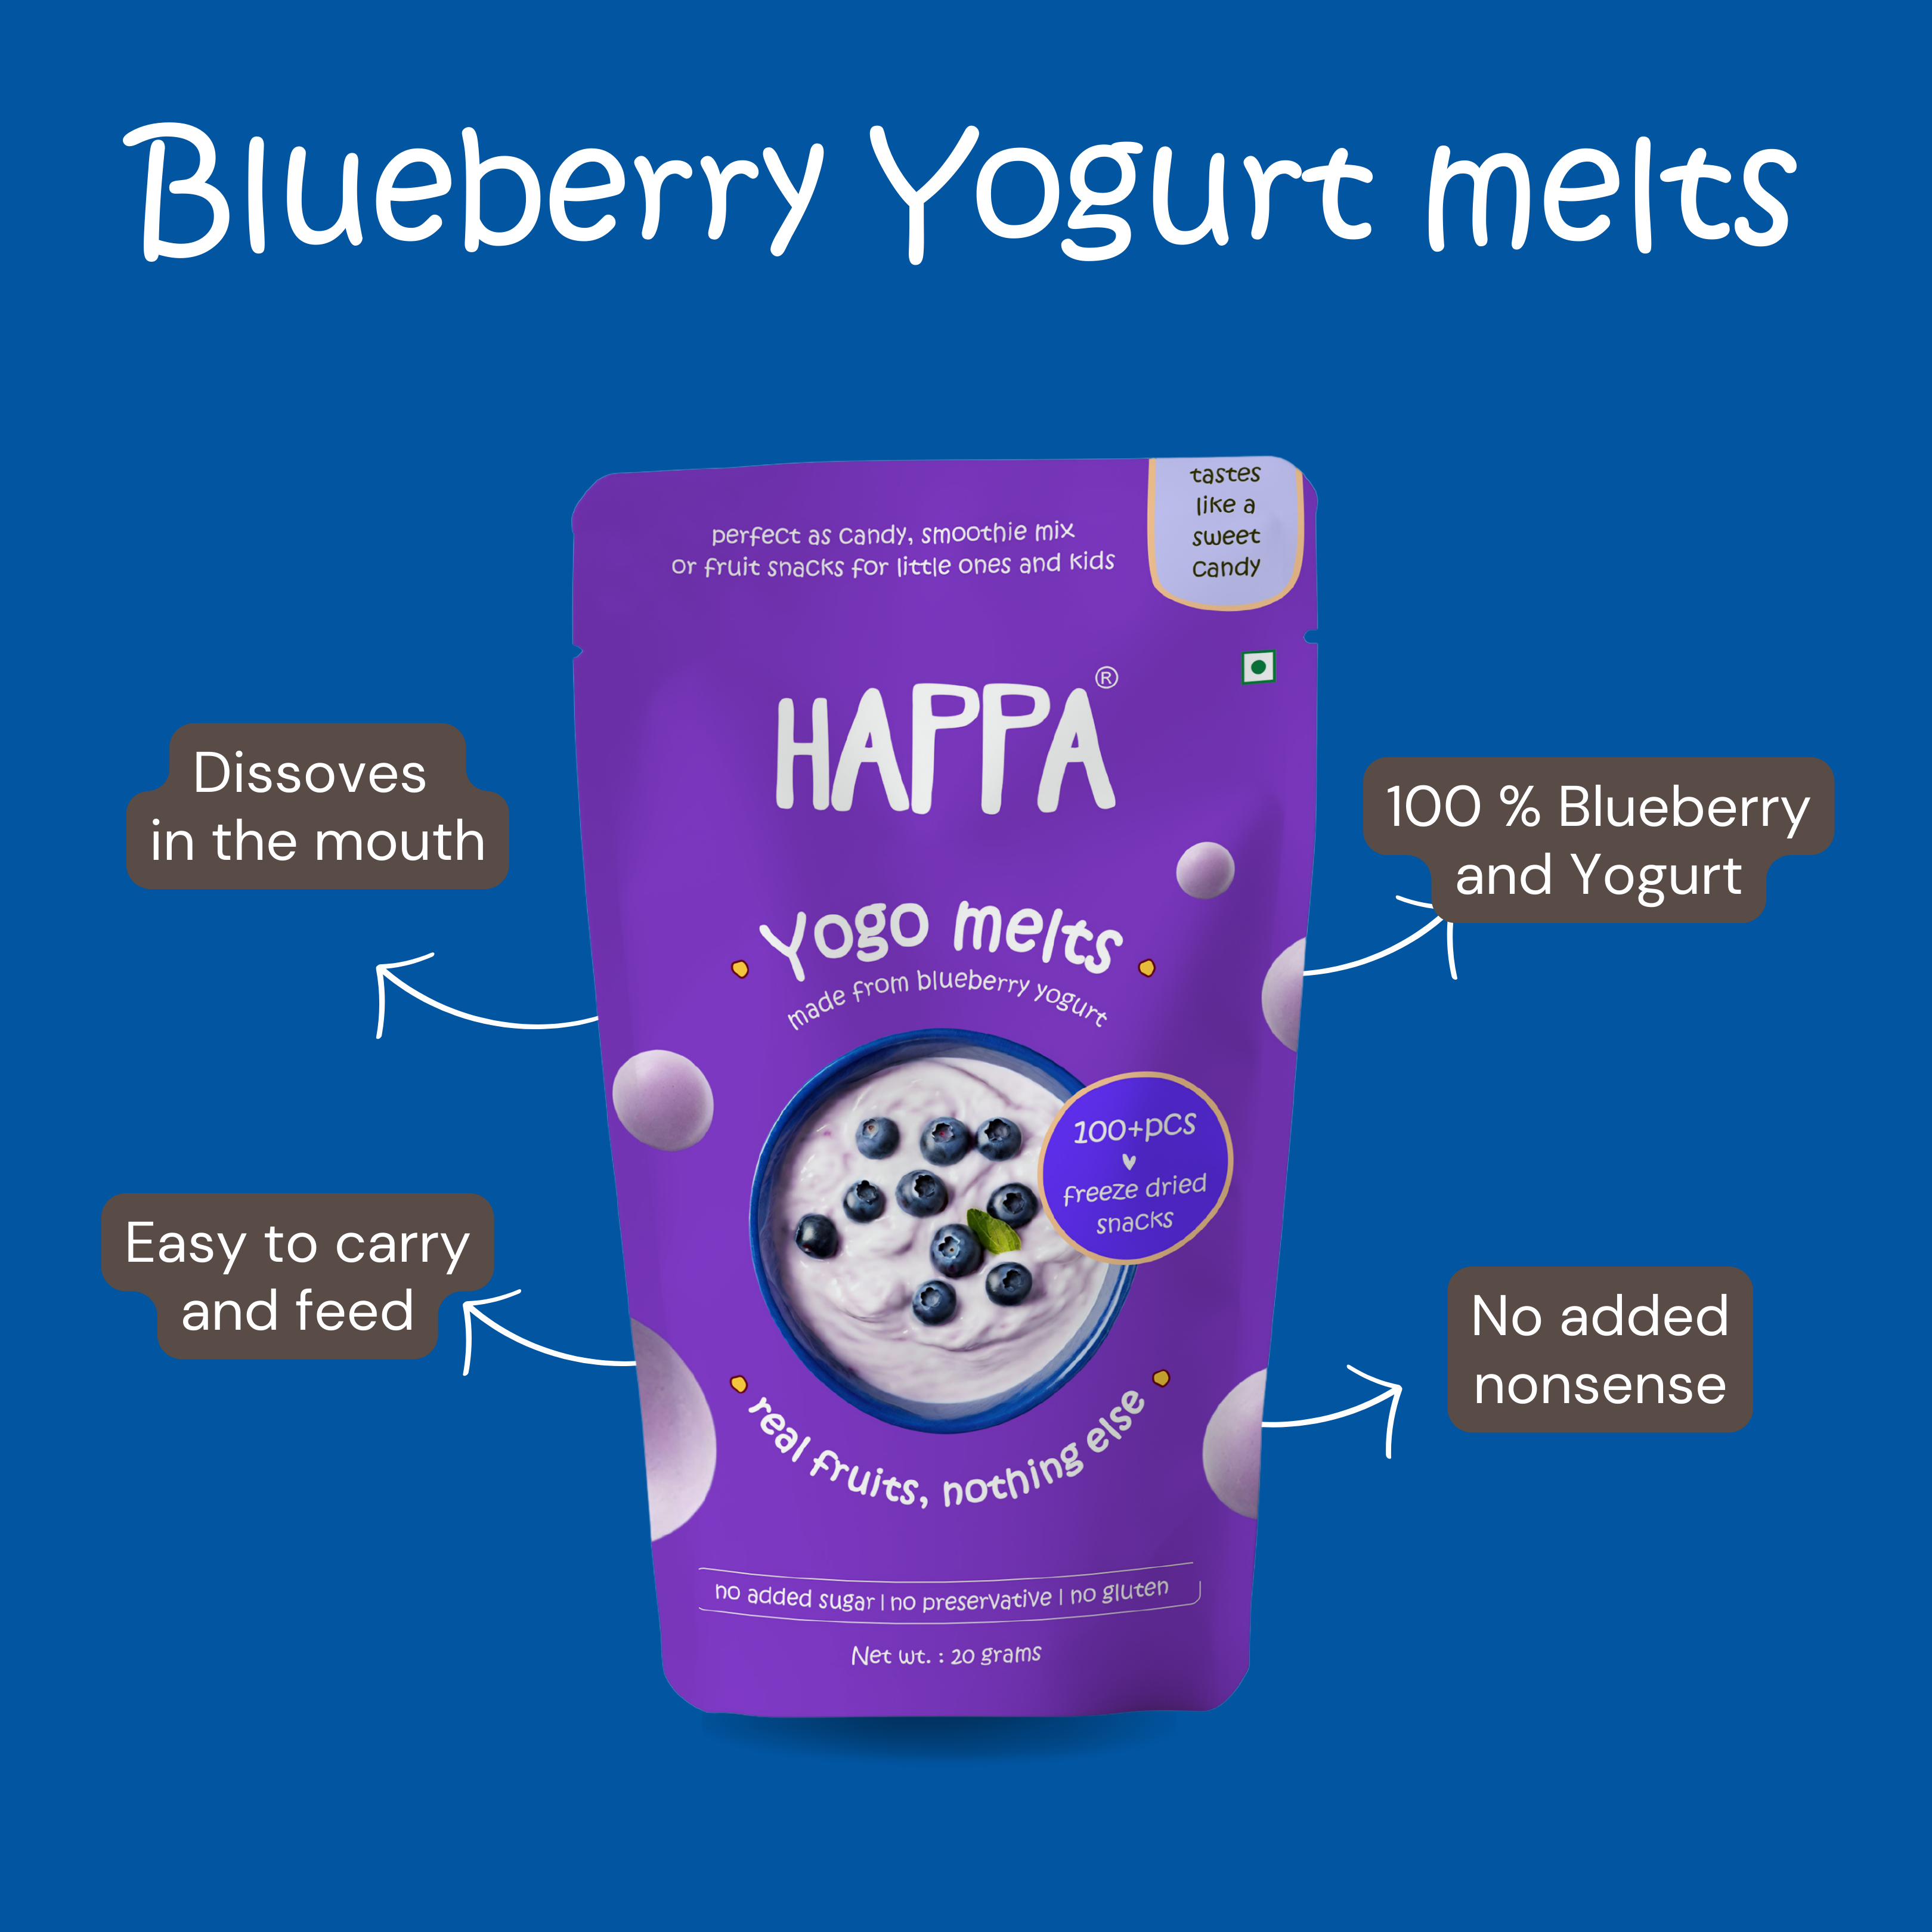 Blueberry yogurt Melts which taste like a candy - Happafoods